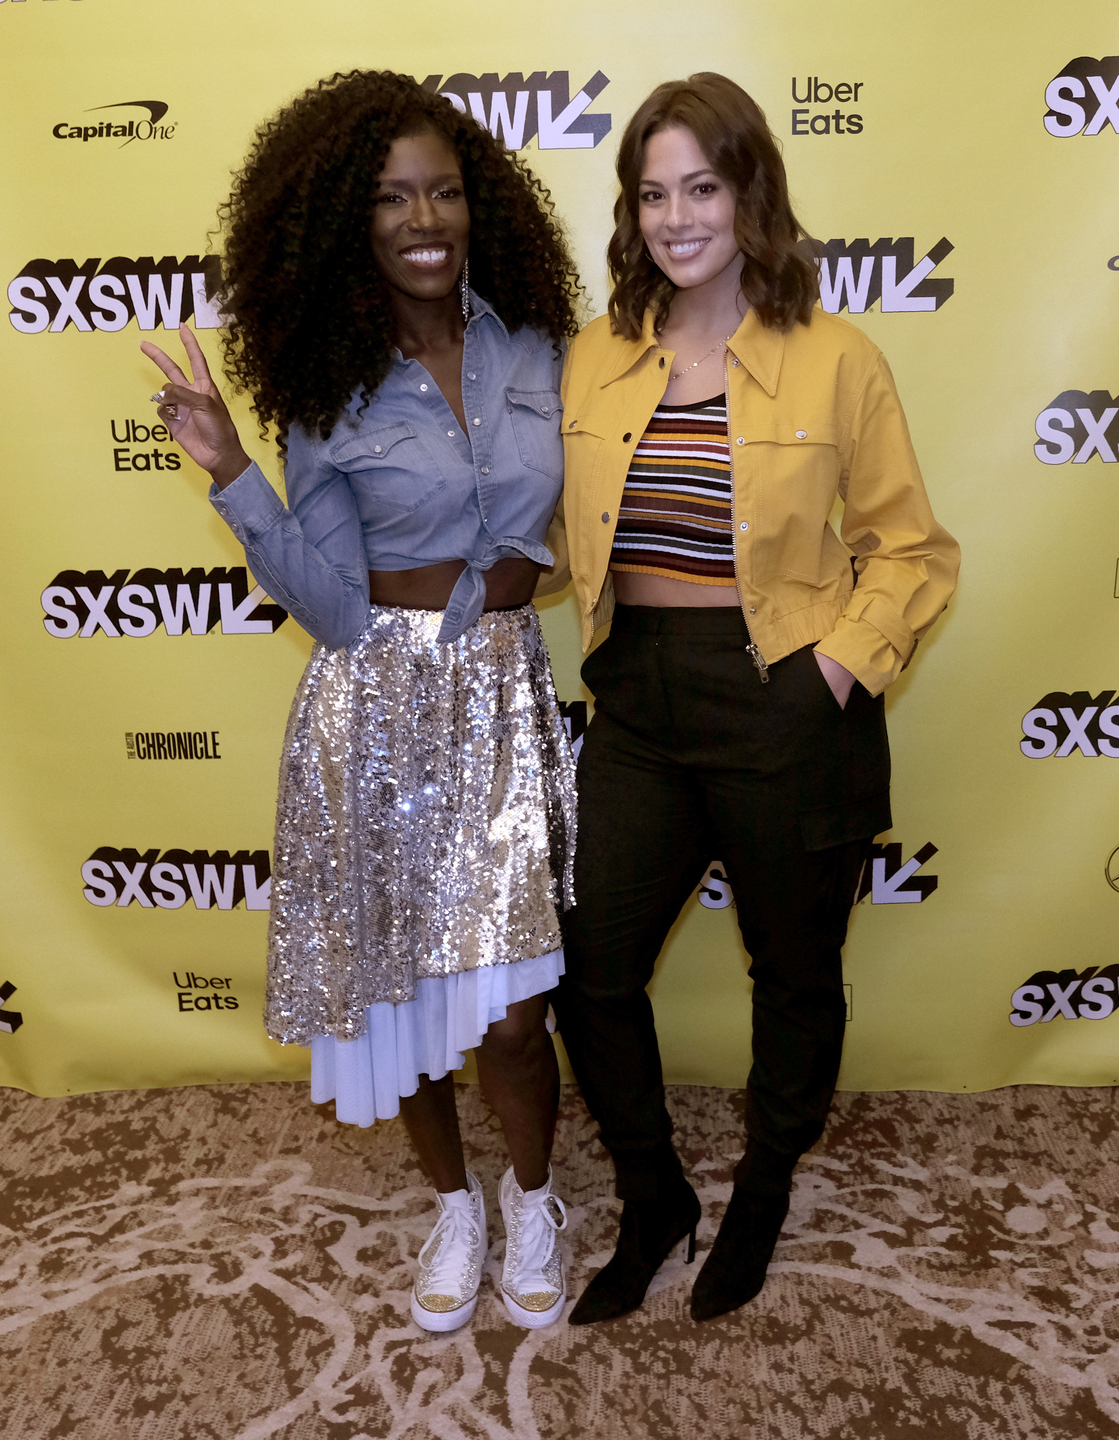 Bozoma Saint John and Ashley Graham at their Convergence Keynote – Photo by Hubert Vestil/Getty Images for SXSW